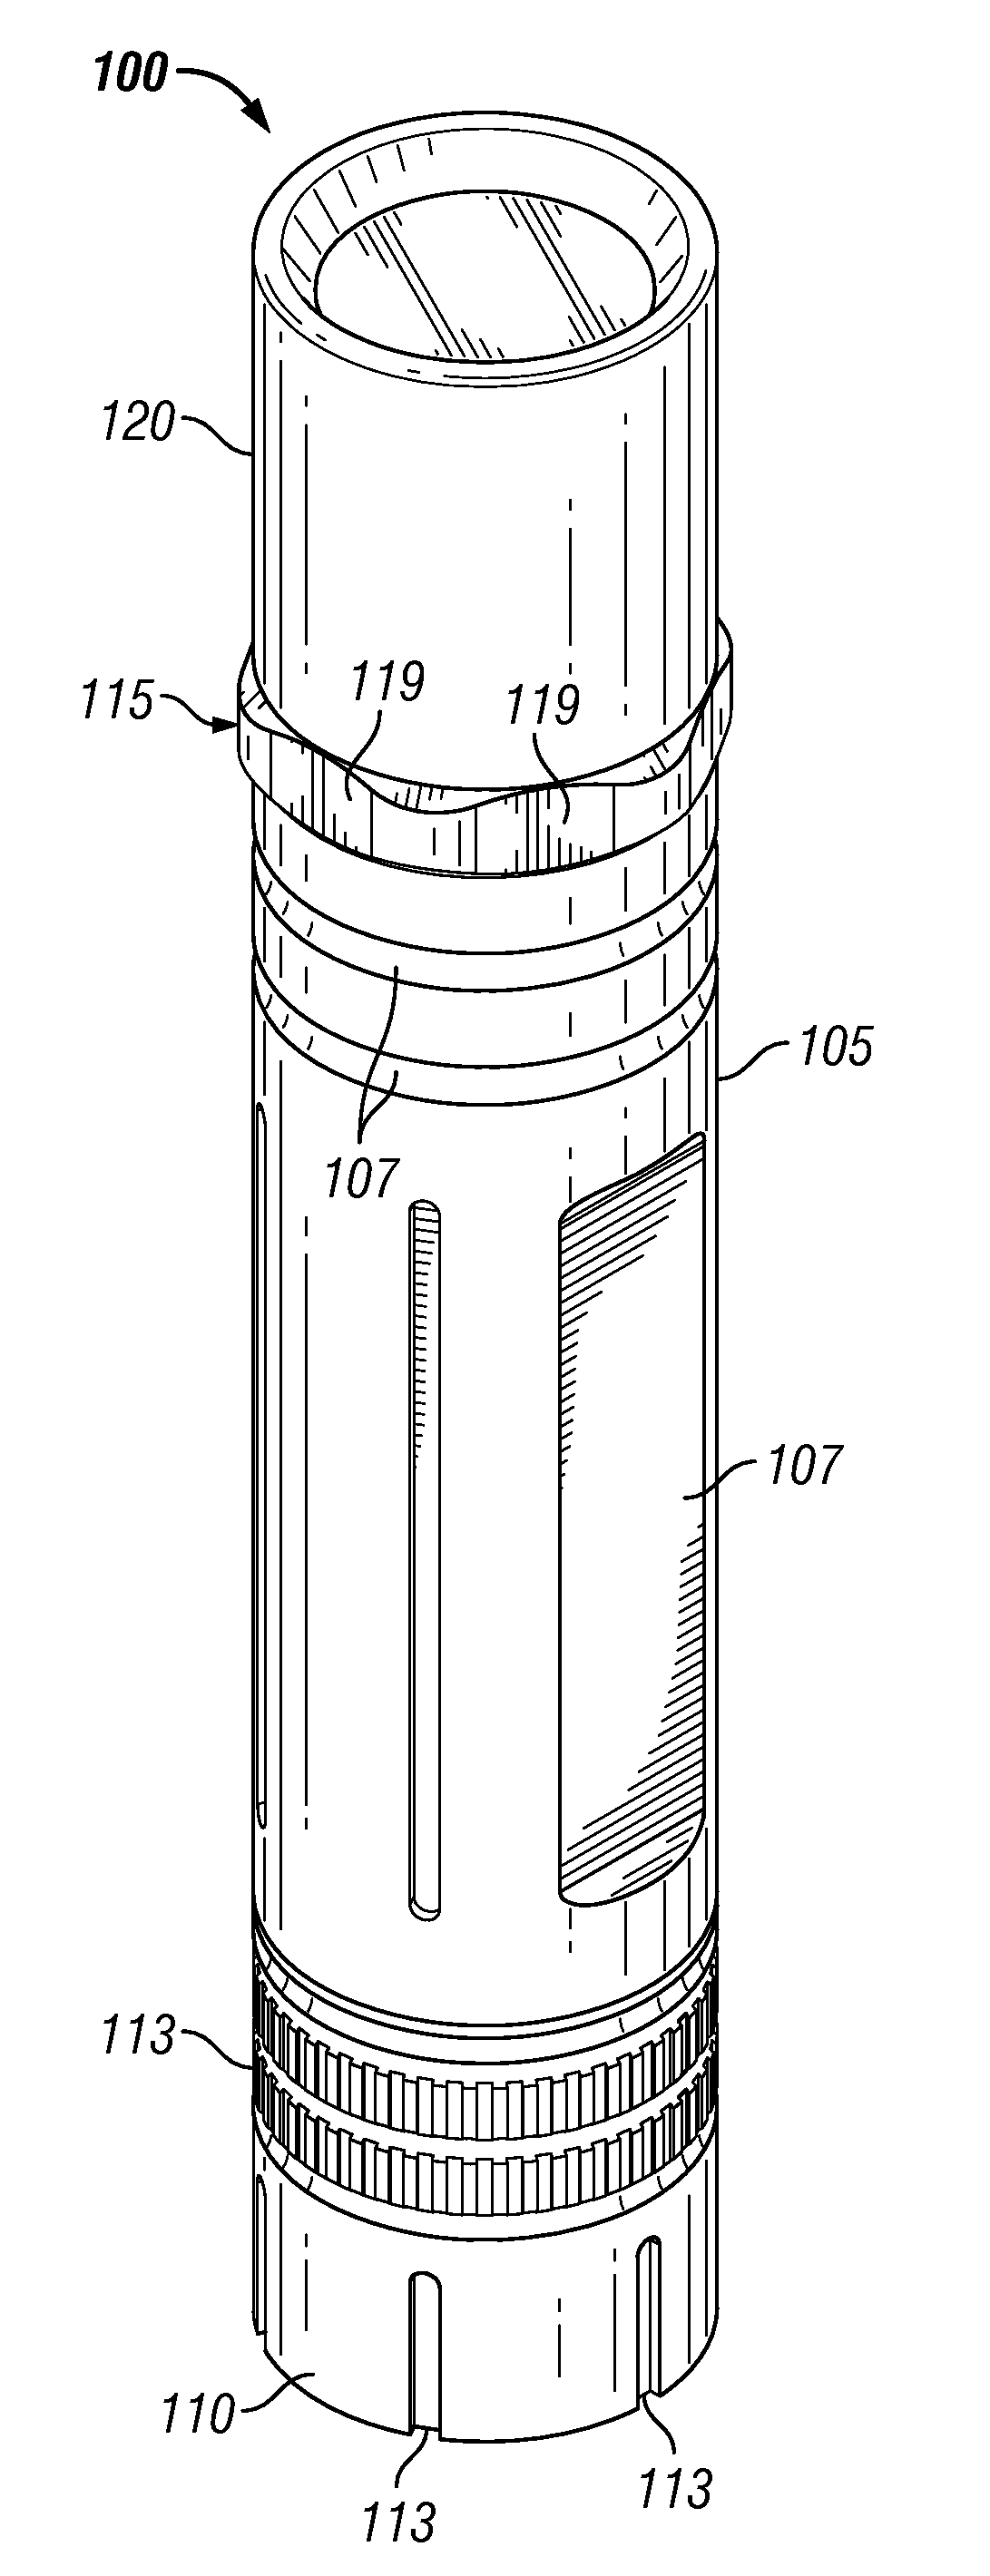 Optical filtering attachment